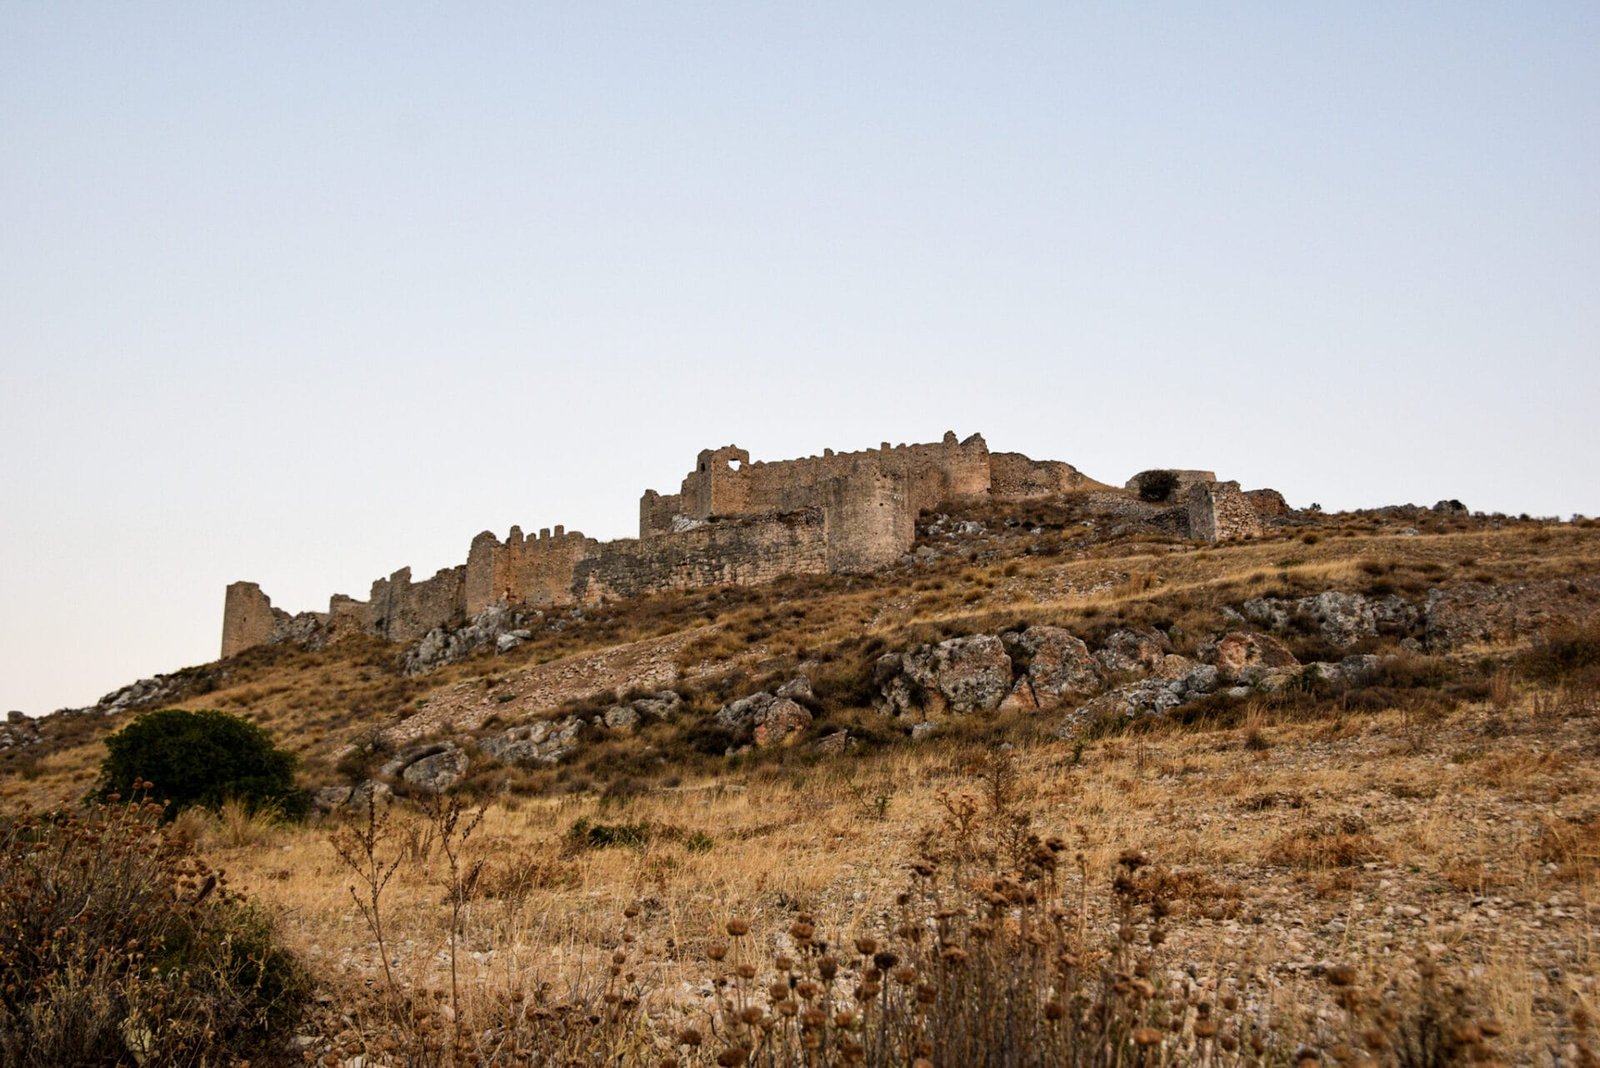 towering remains of a Frankish Crusader castle on top of a hill